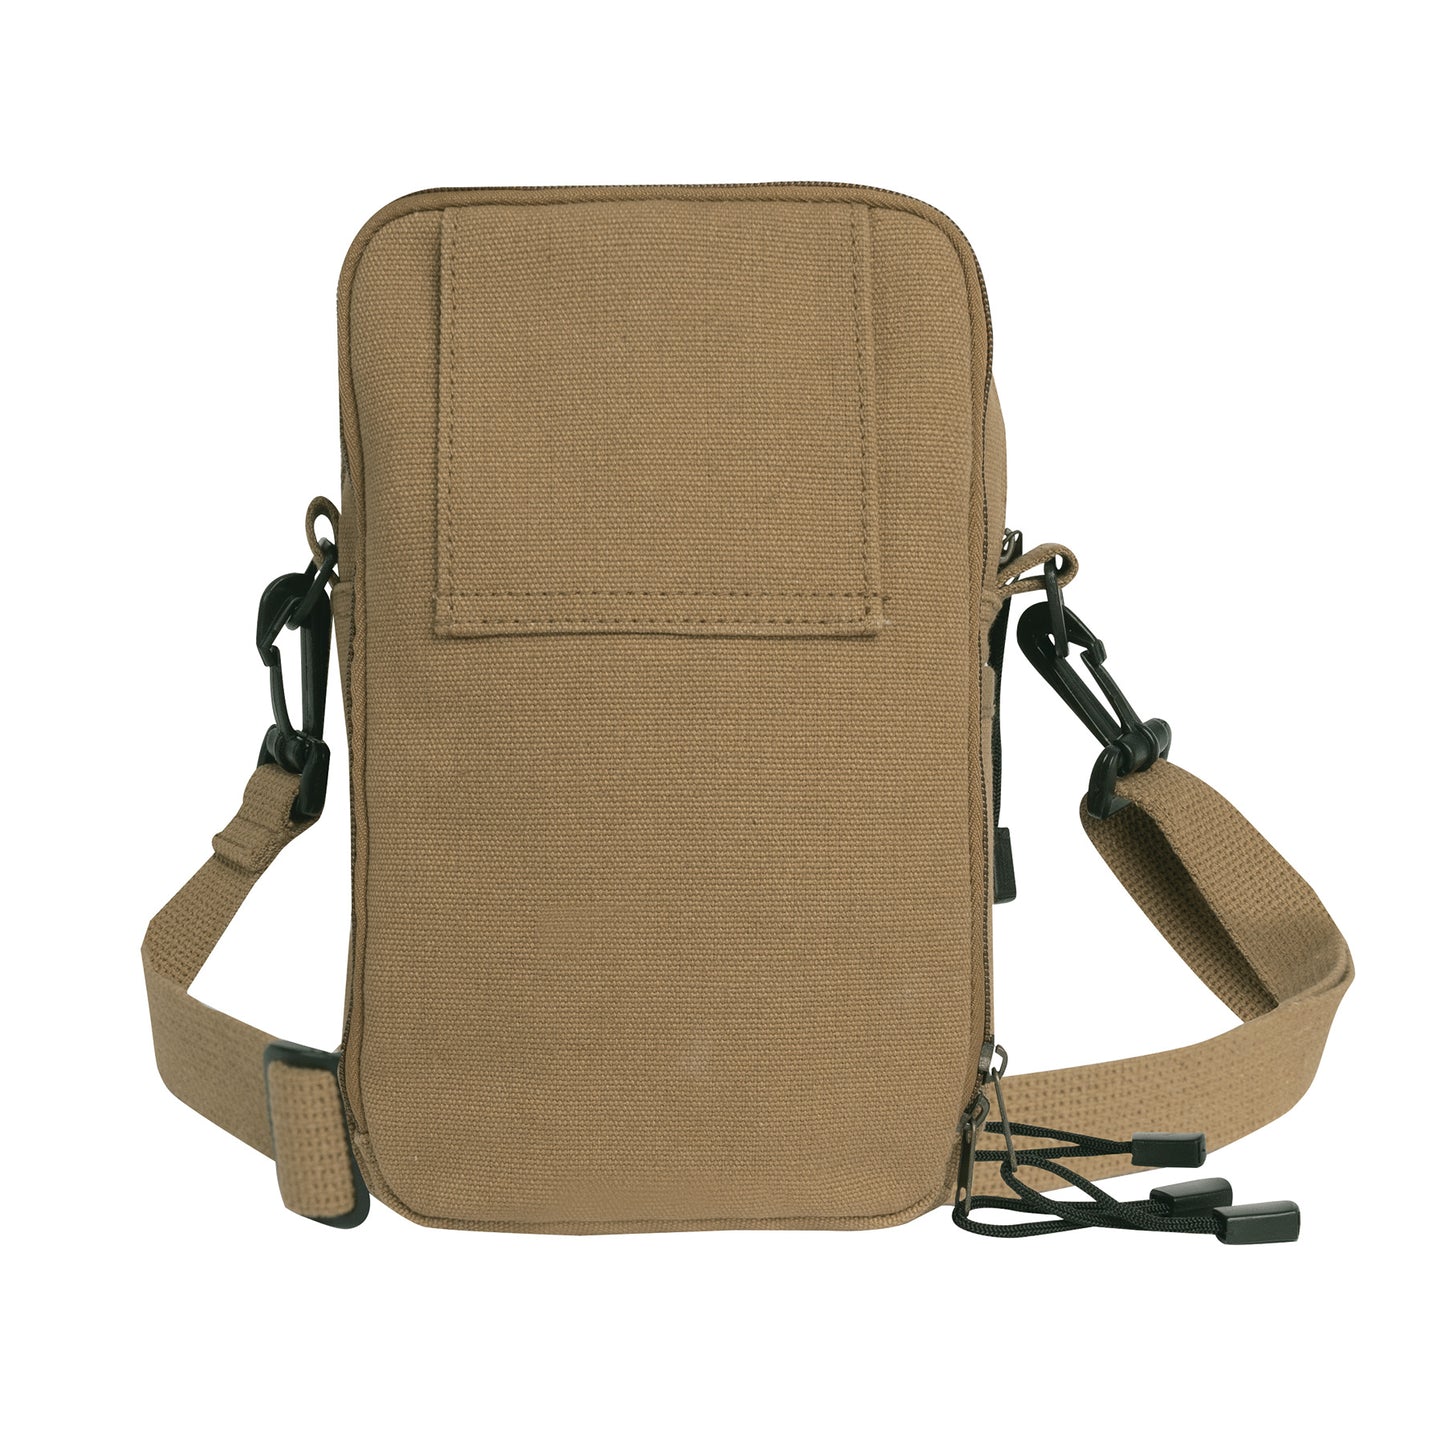 Rothco Heavyweight Classic Canvas Passport Travel Pouch